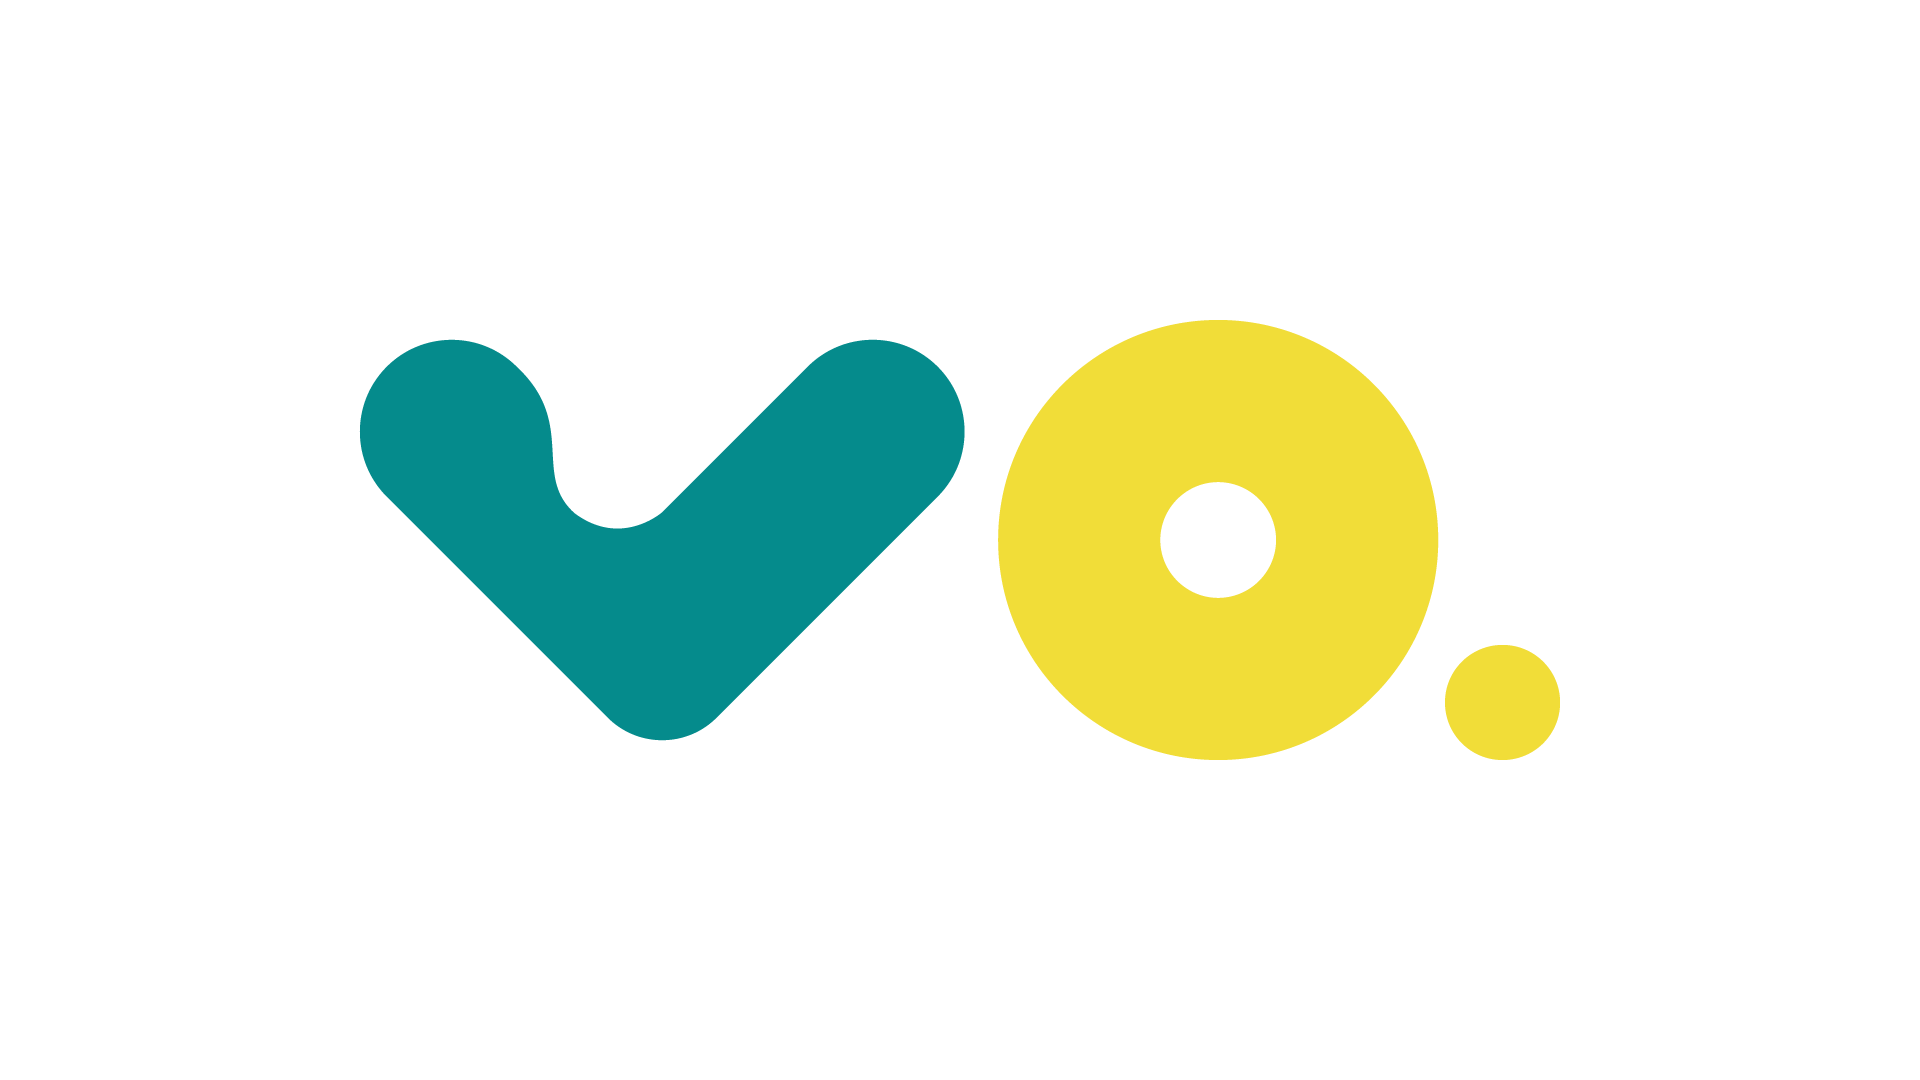 vo.md